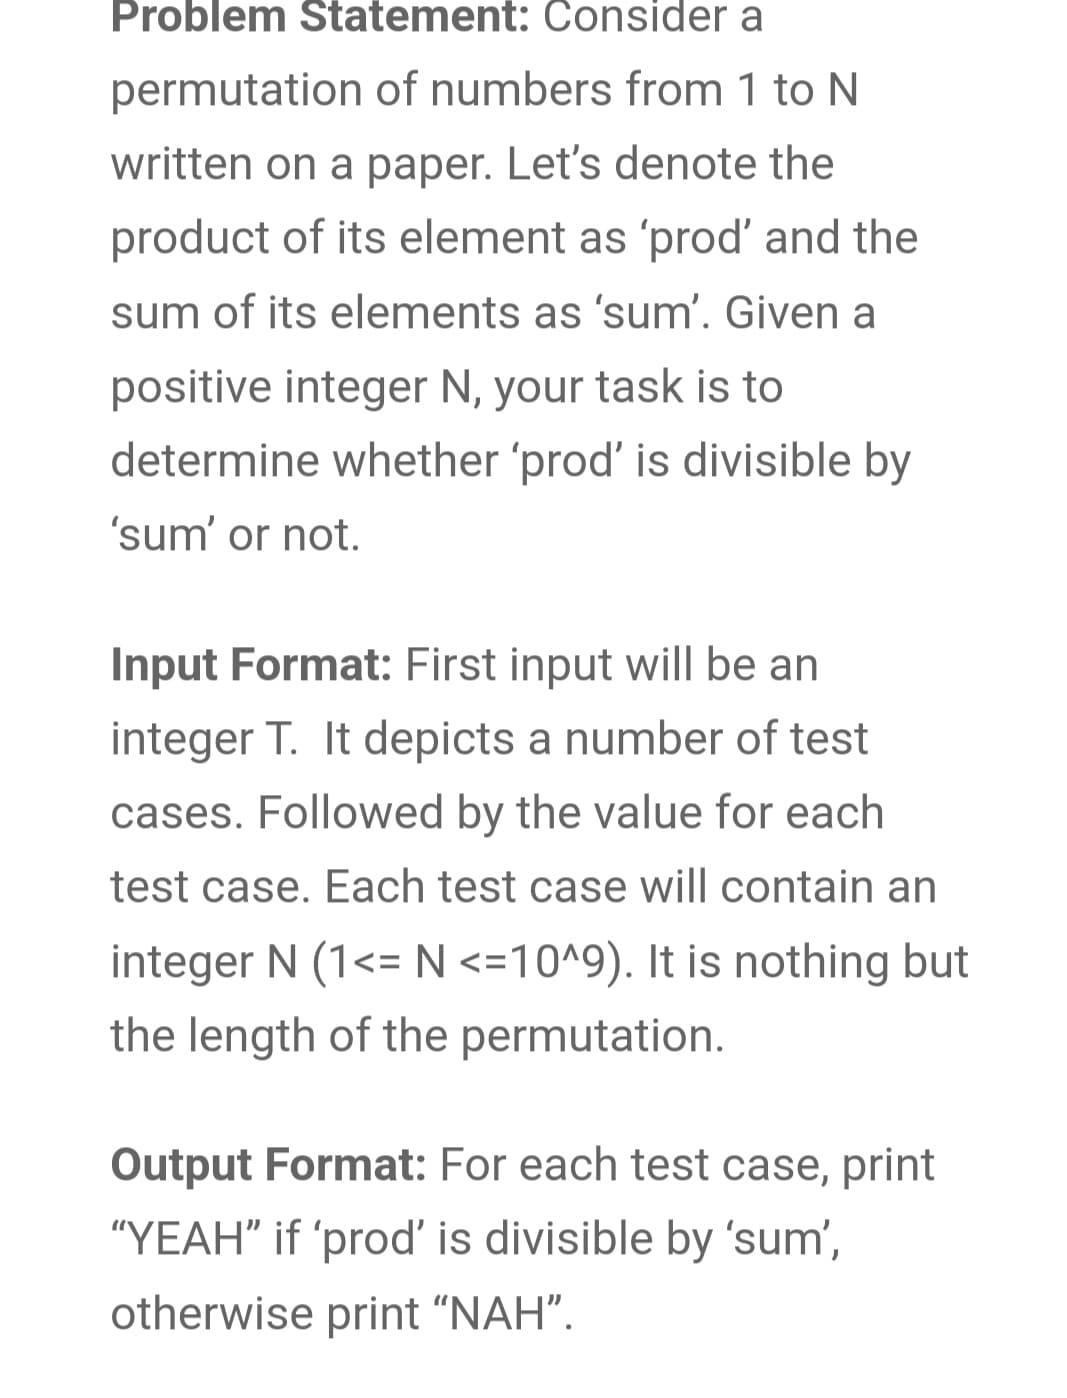 Problem Statement: Consider a
permutation of numbers from 1 to N
written on a paper. Let's denote the
product of its element as 'prod' and the
sum of its elements as 'sum'. Given a
positive integer N, your task is to
determine whether 'prod' is divisible by
'sum' or not.
Input Format: First input will be an
integer T. It depicts a number of test
cases. Followed by the value for each
test case. Each test case will contain an
integer N (1<= N <=10^9). It is nothing but
the length of the permutation.
Output Format: For each test case, print
"YEAH" if 'prod' is divisible by 'sum',
otherwise print "NAH".